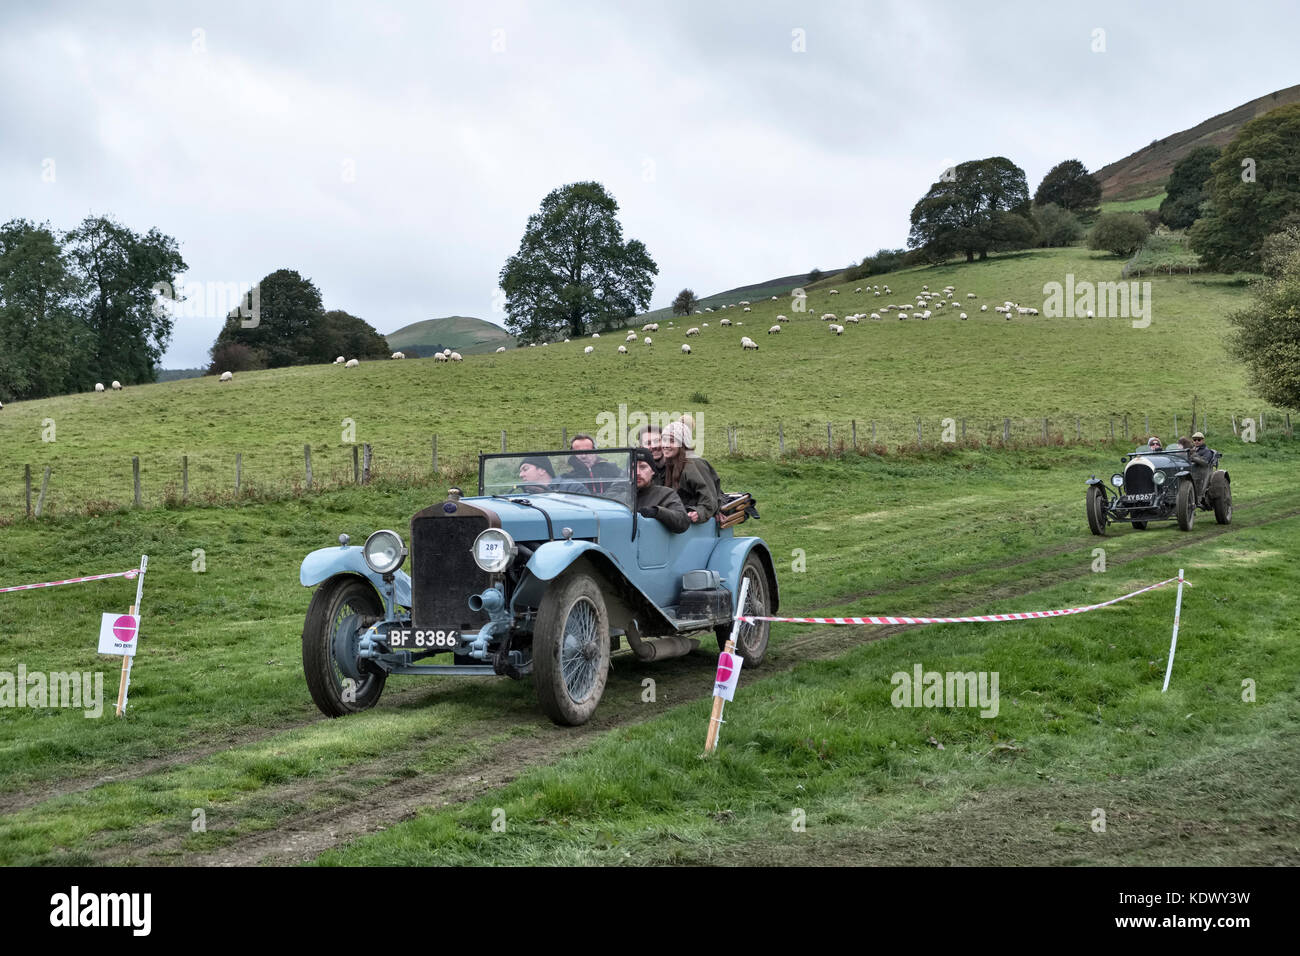 A meeting of the Vintage Sports-Car Club (VSCC) at Badlands Farm, Kinnerton, mid-Wales, UK. A 1928 Delage DR70 followed by a 1925 Bentley Stock Photo